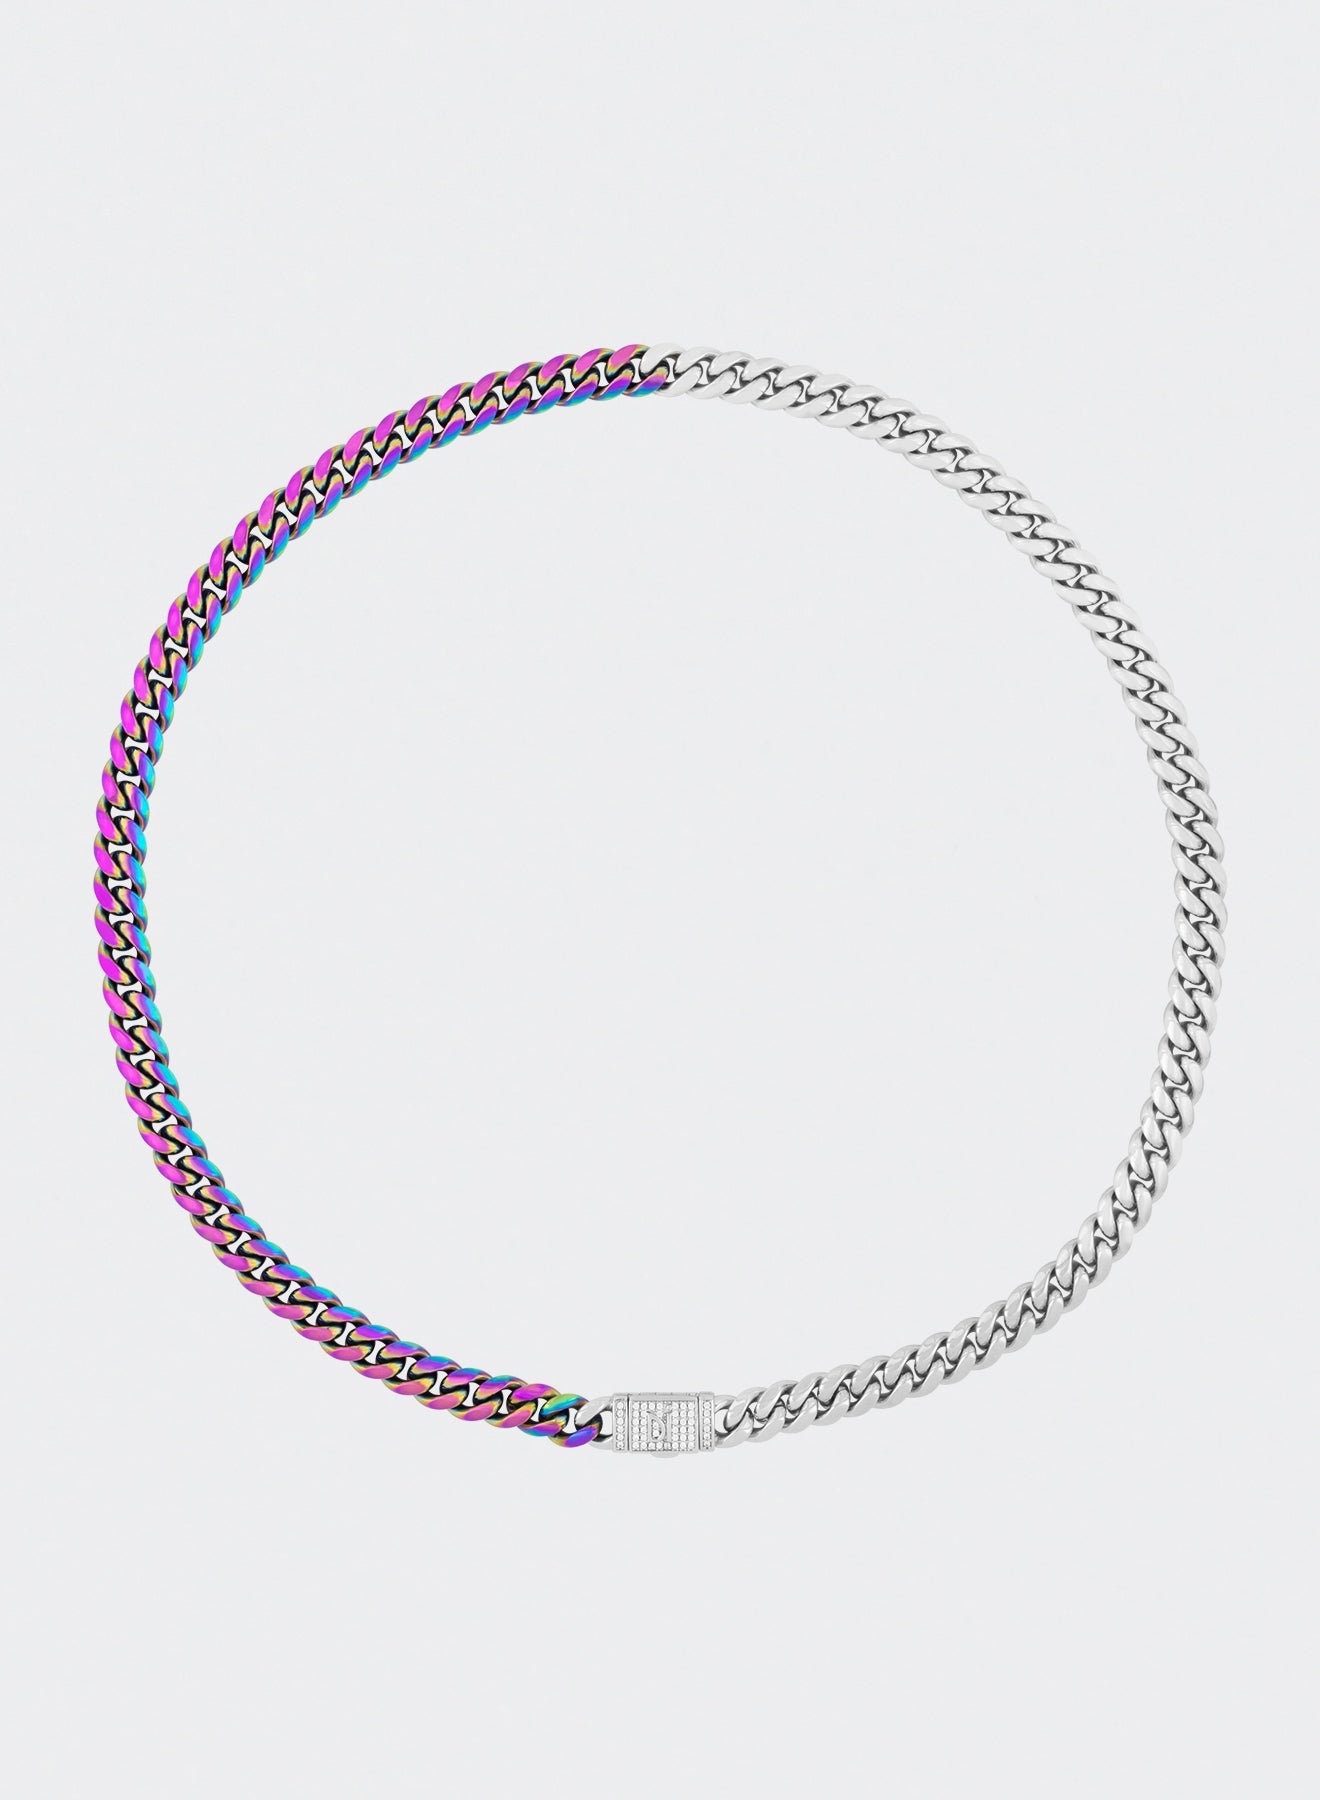 18k white gold and rainbow coated cuban chain necklace with hand-set micropavé stones in white